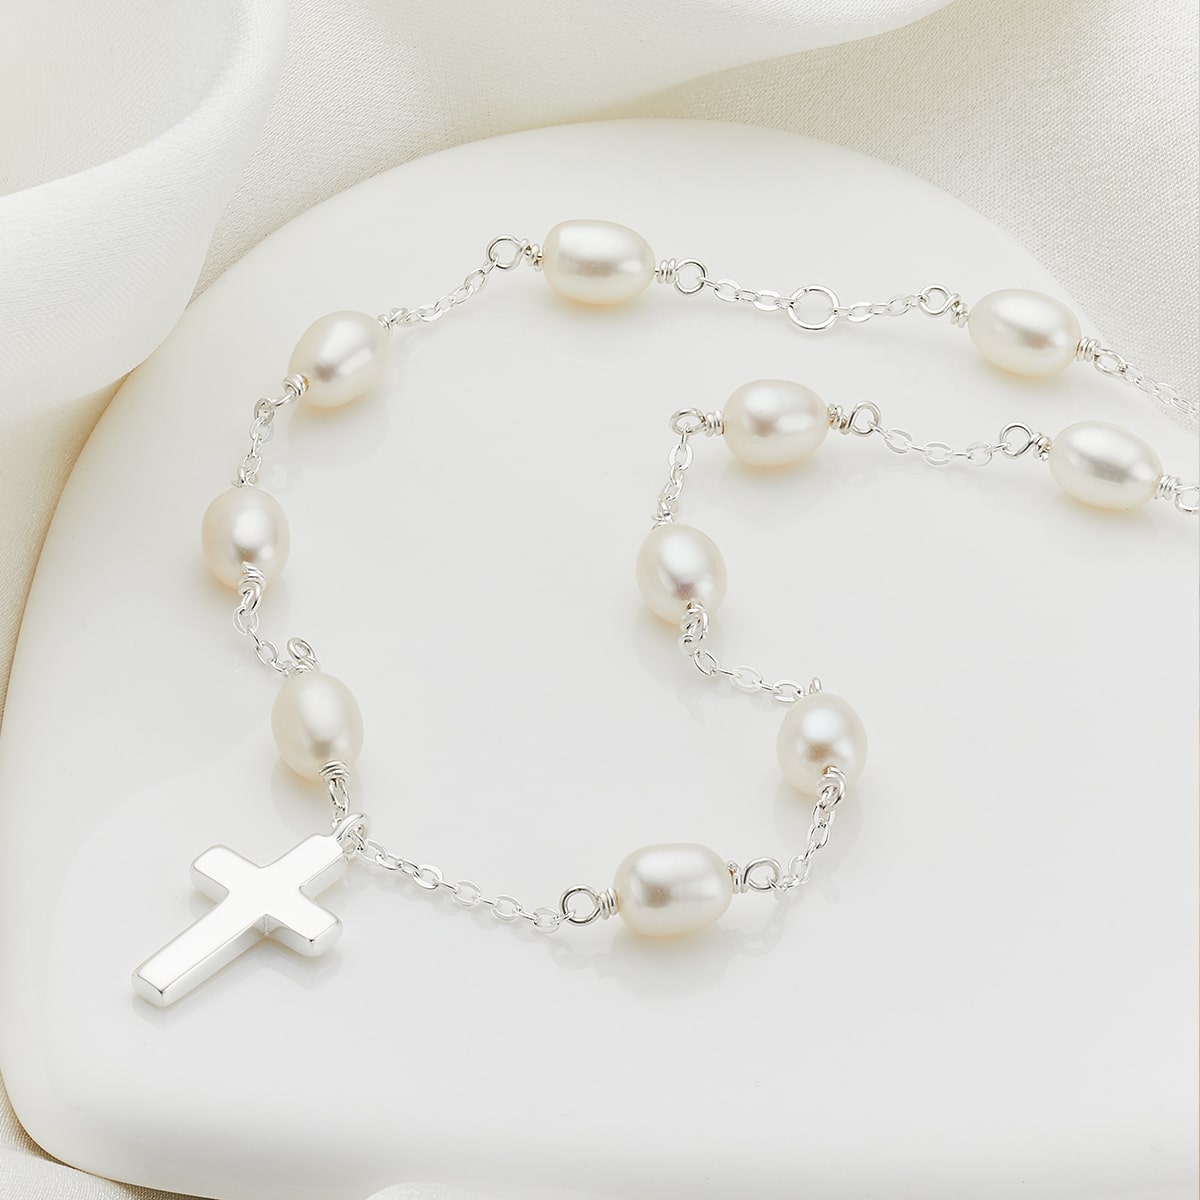 Top Holy Communion Gifts for Her in 2022